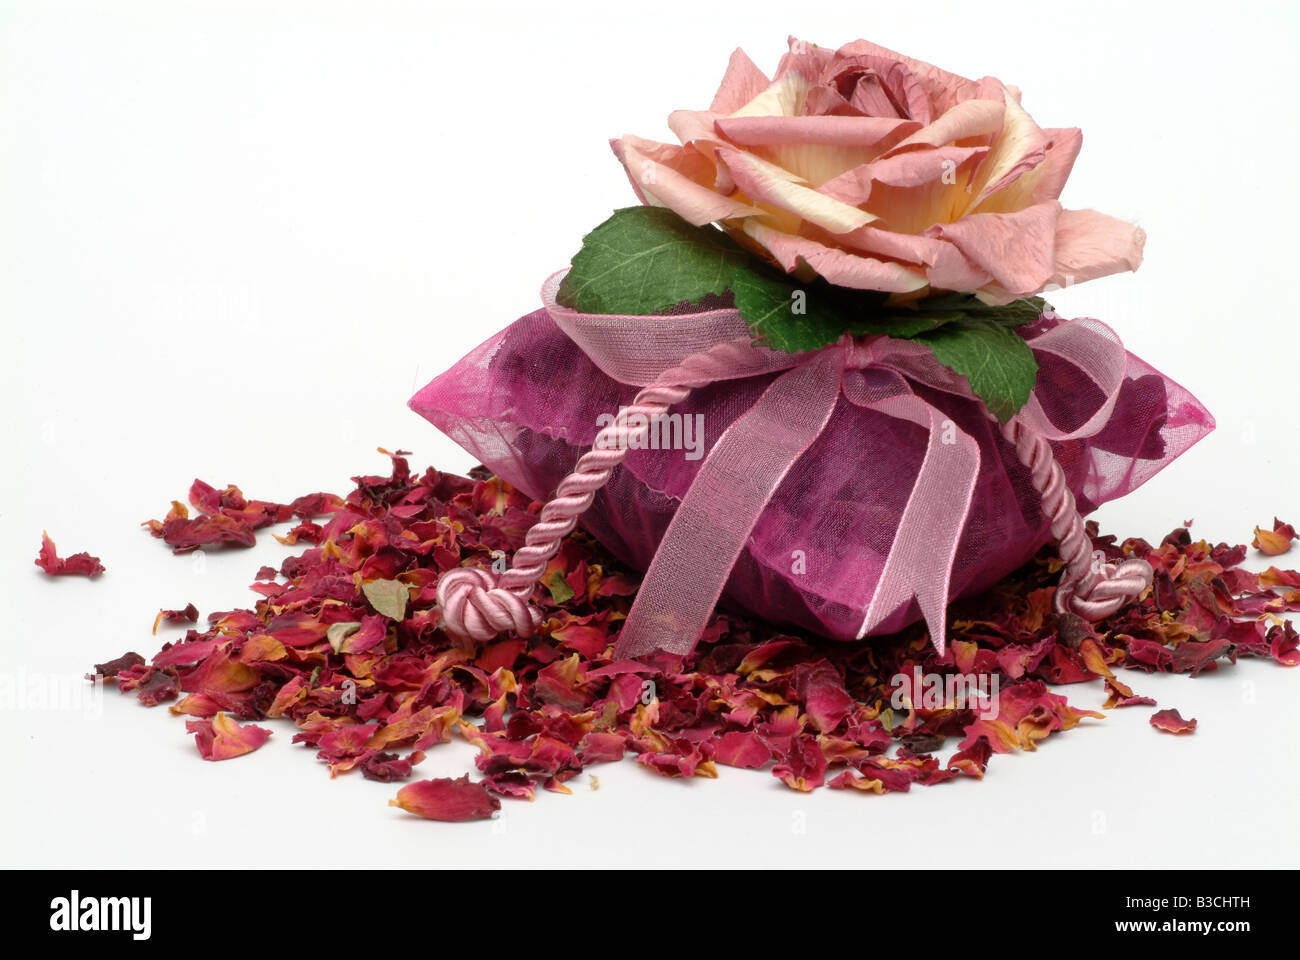 aromatic therapy scent of dried roseblossoms Stock Photo